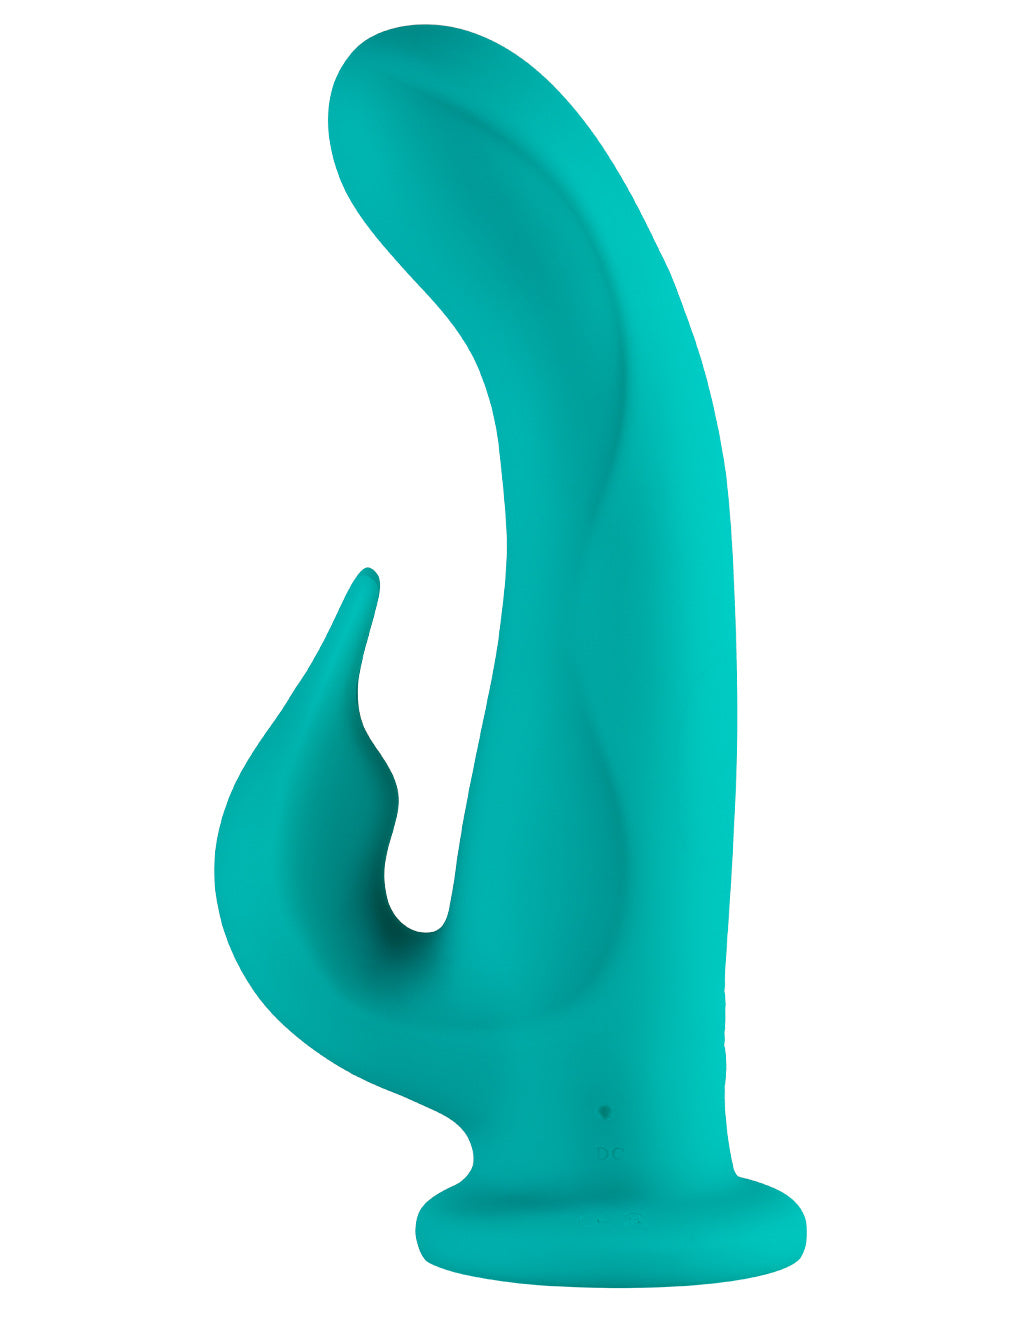 Femme Funn Pirouette Dual Stimulating Suction Cup Vibrator- Turquoise- side